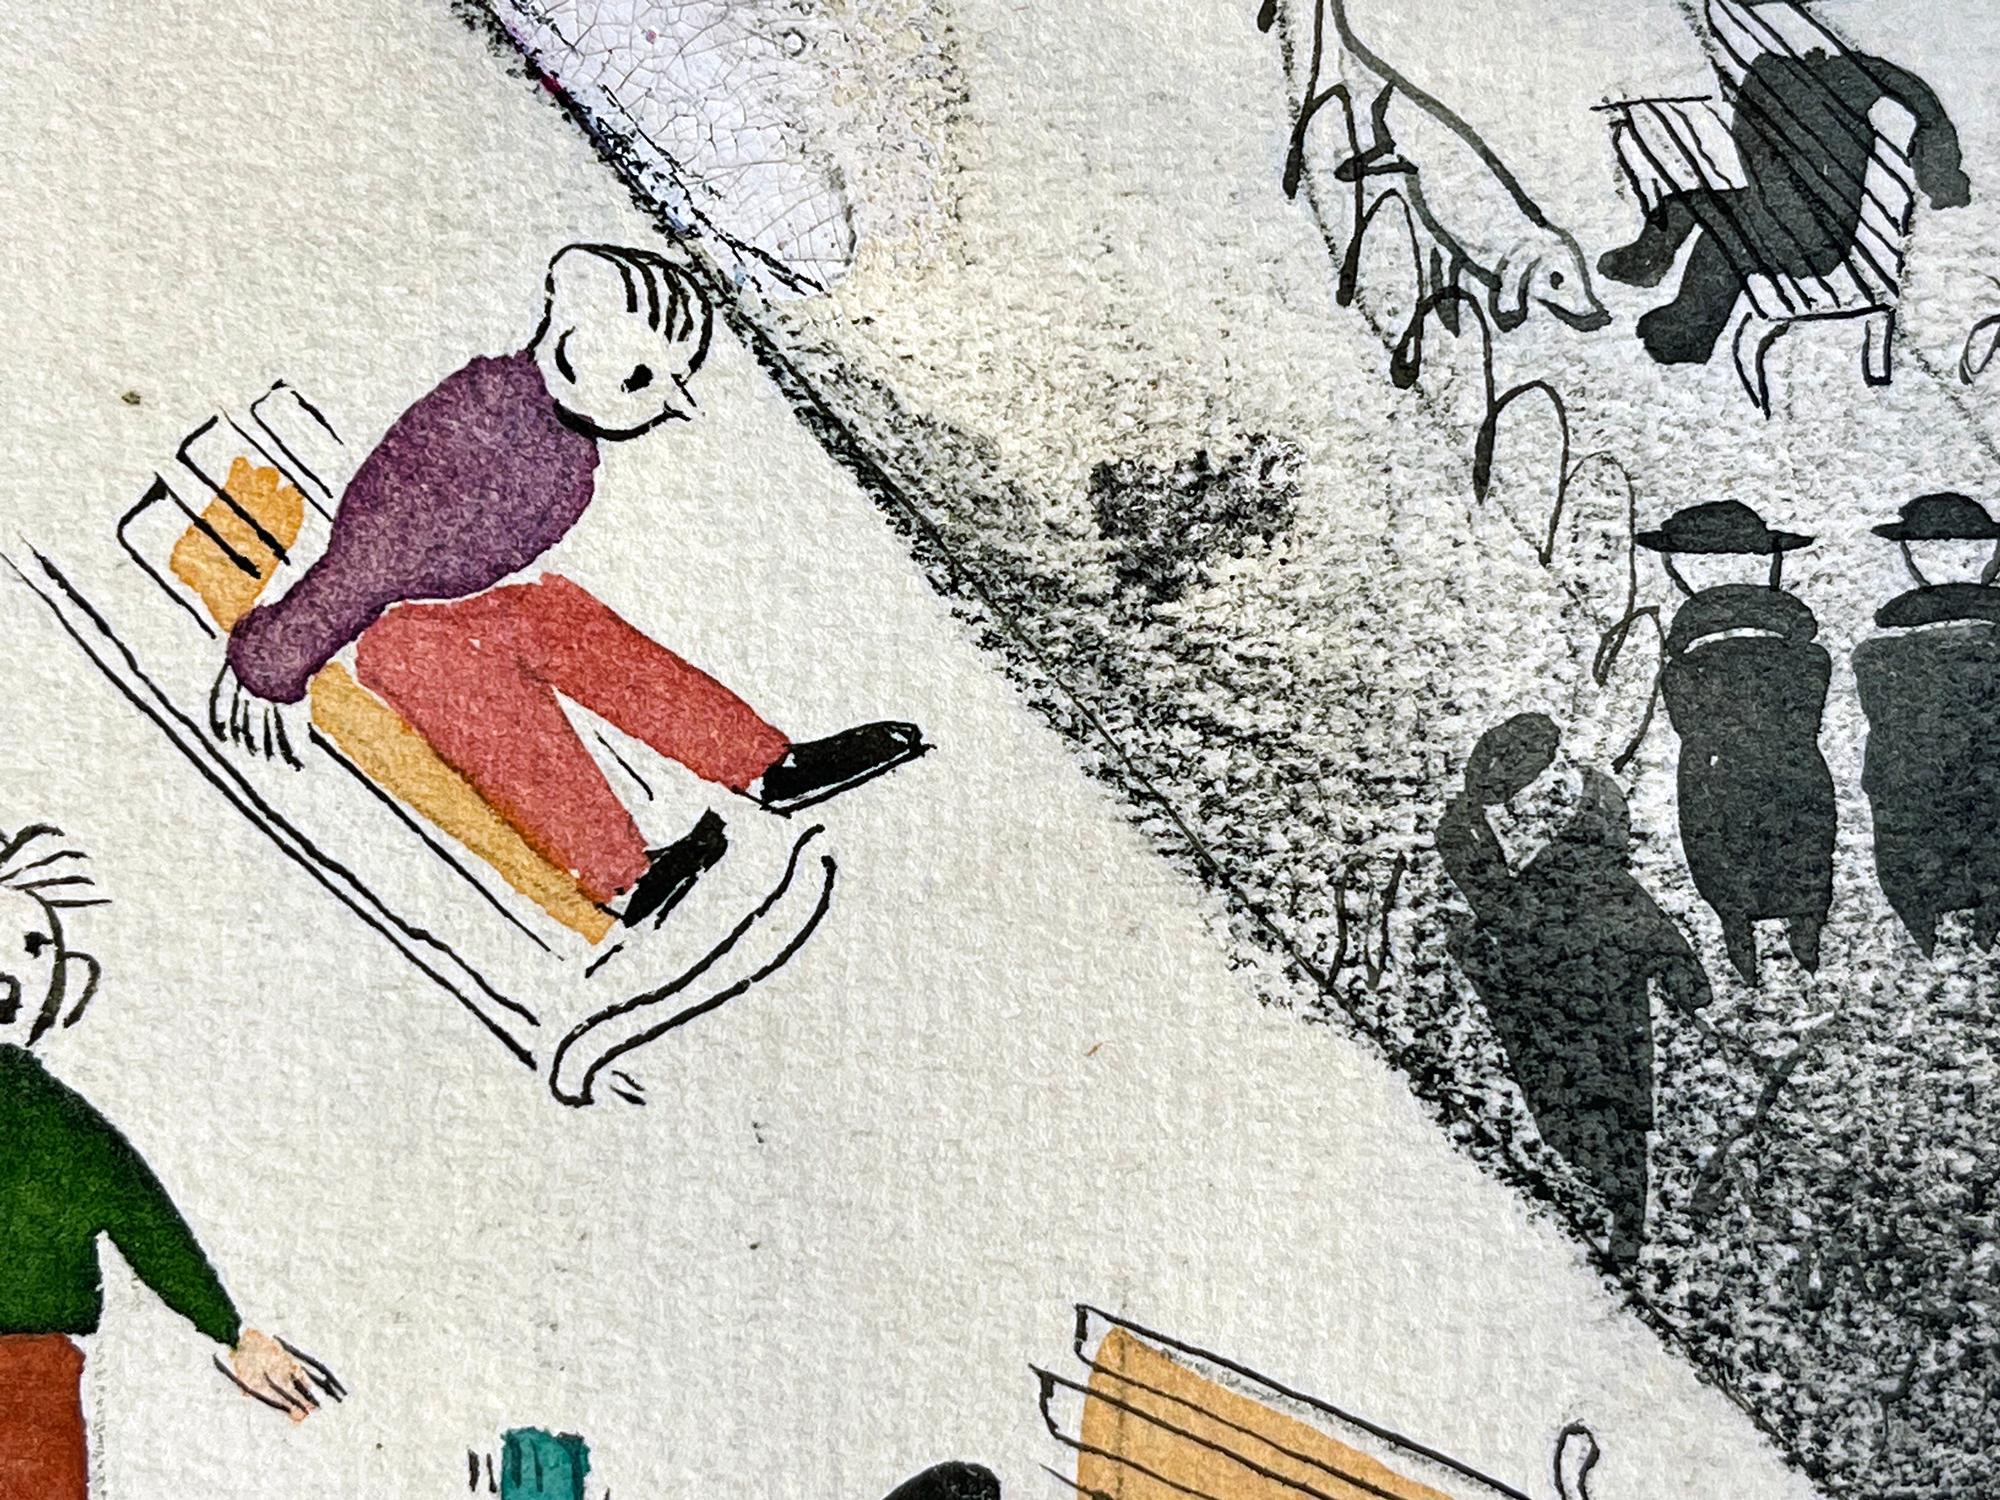 Hungarian/American artist/illustrator depicts a charming scene of sledding in the snow in Central Park. The work is abstract in its design as it's functional in its narrative - Unpublished New Yorker Cover - Unsigned, Matted and not framed.